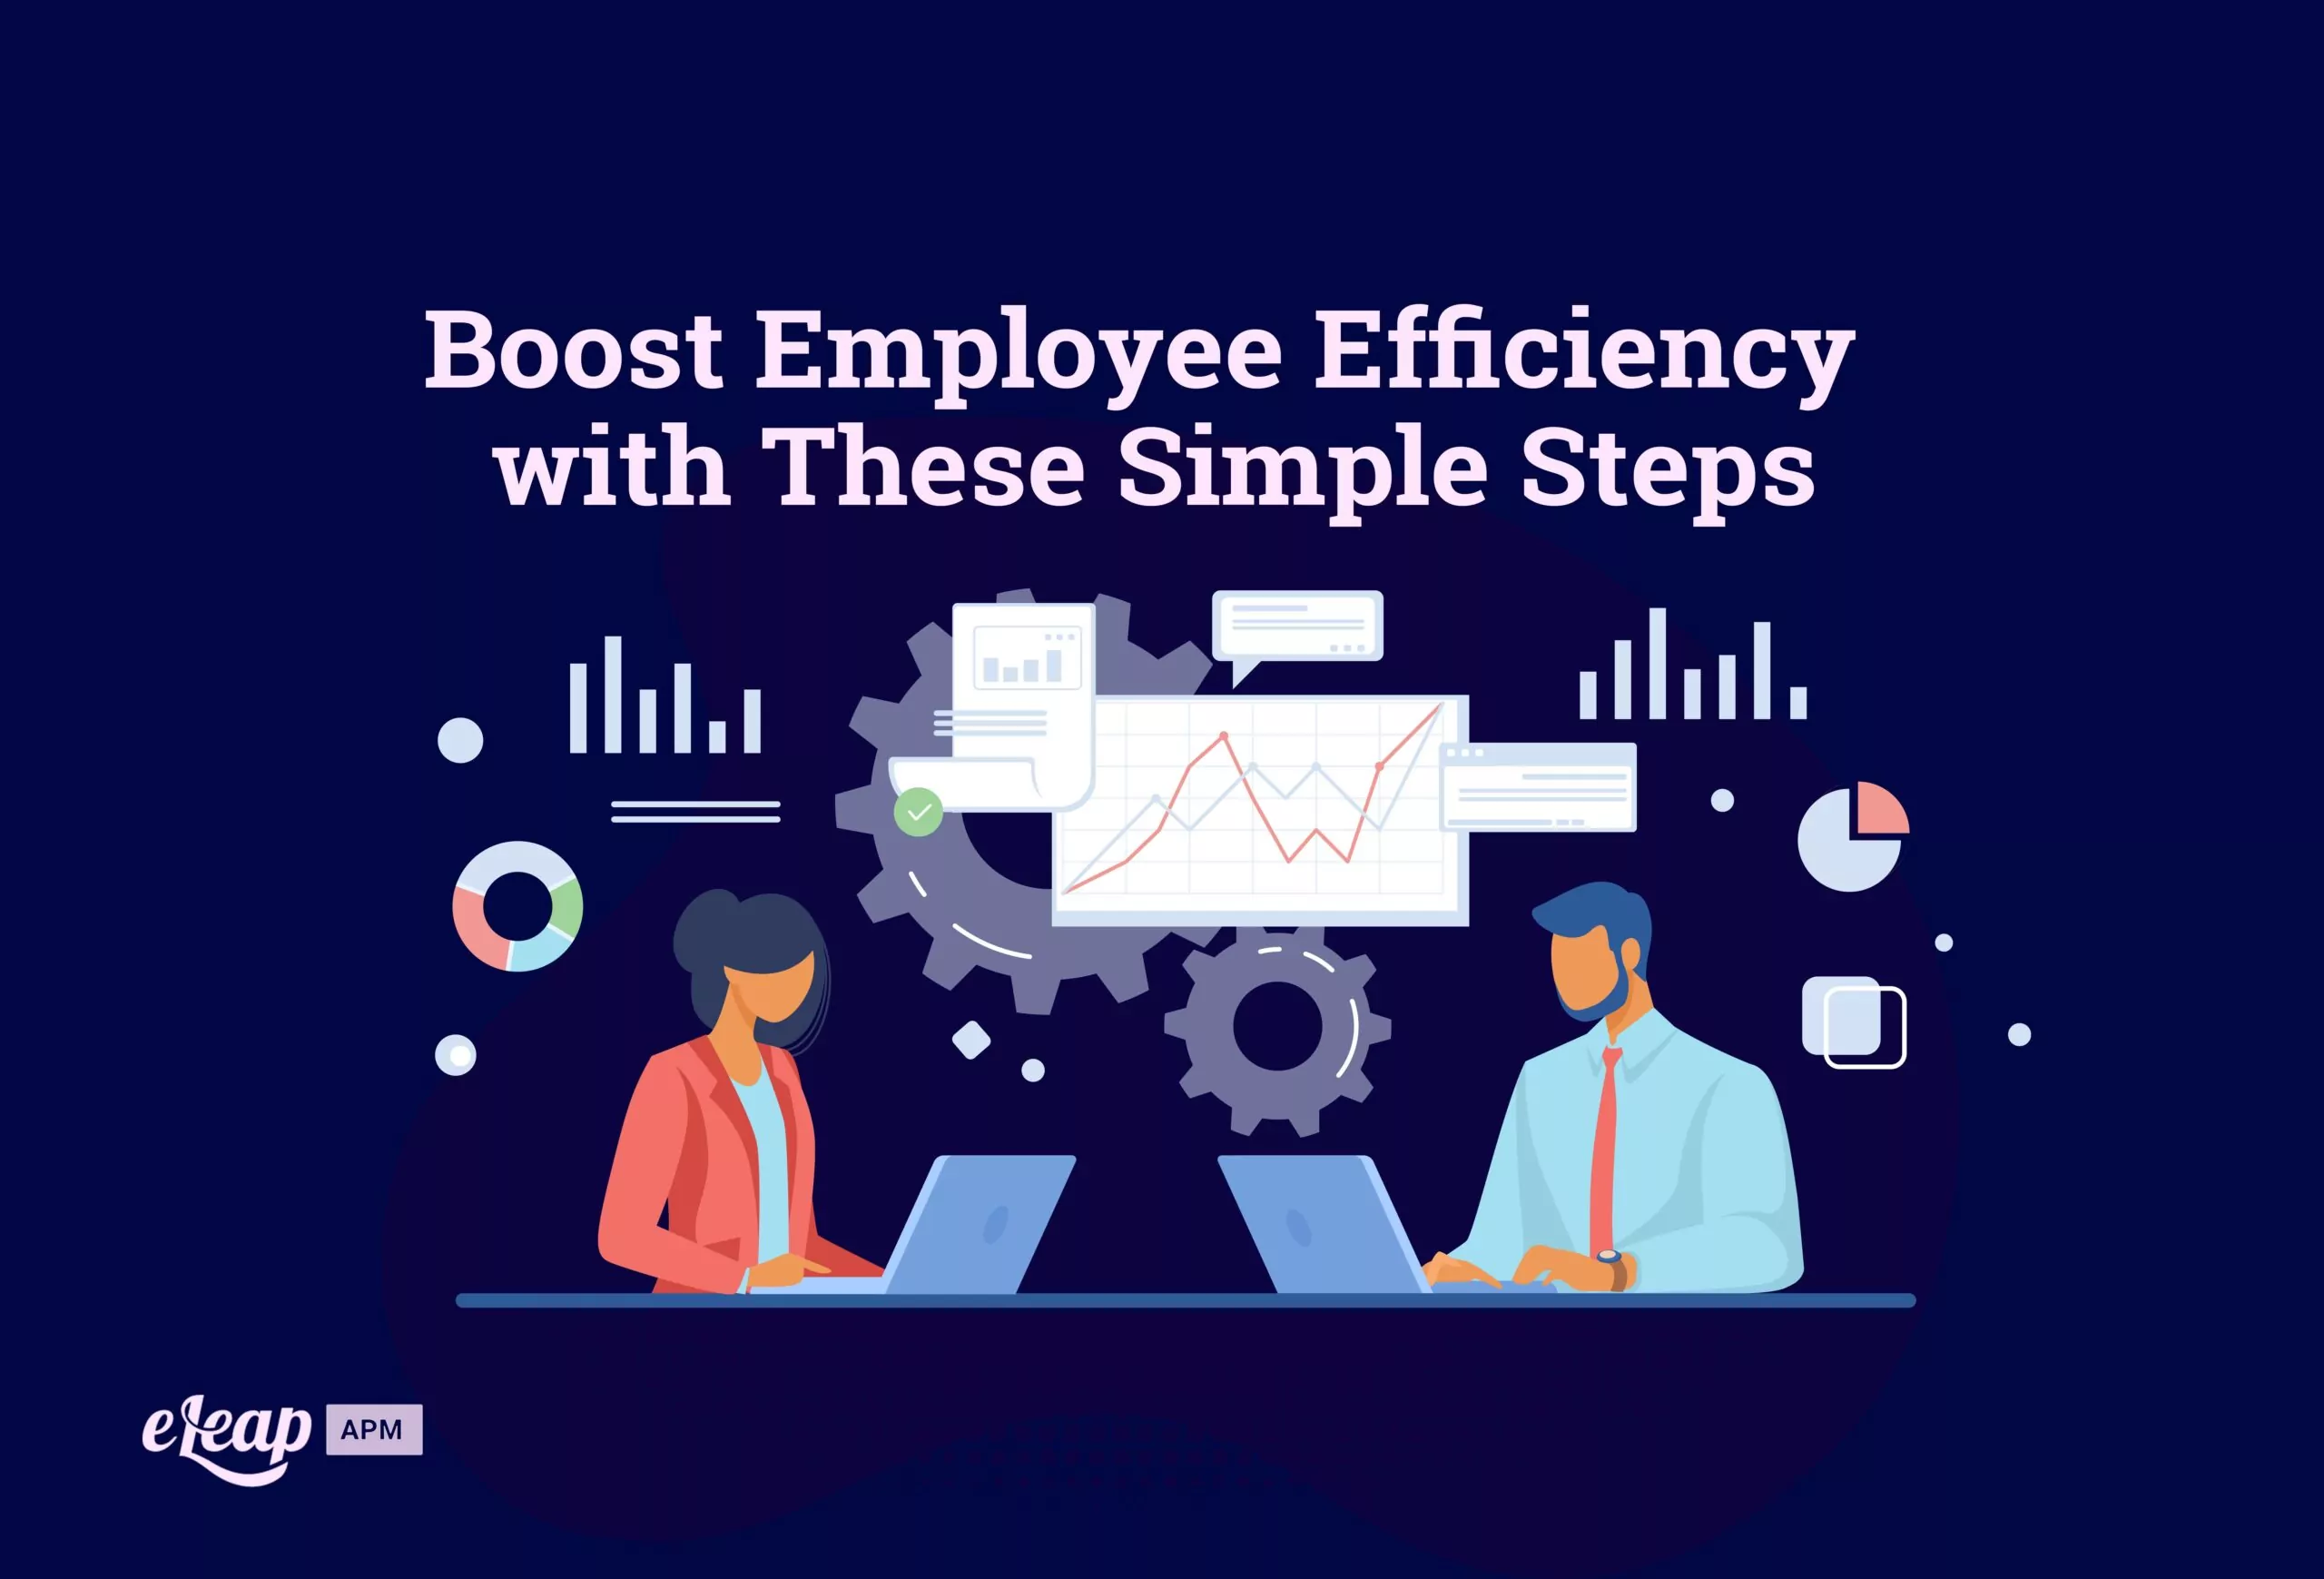 Boost Employee Efficiency with These Simple Steps